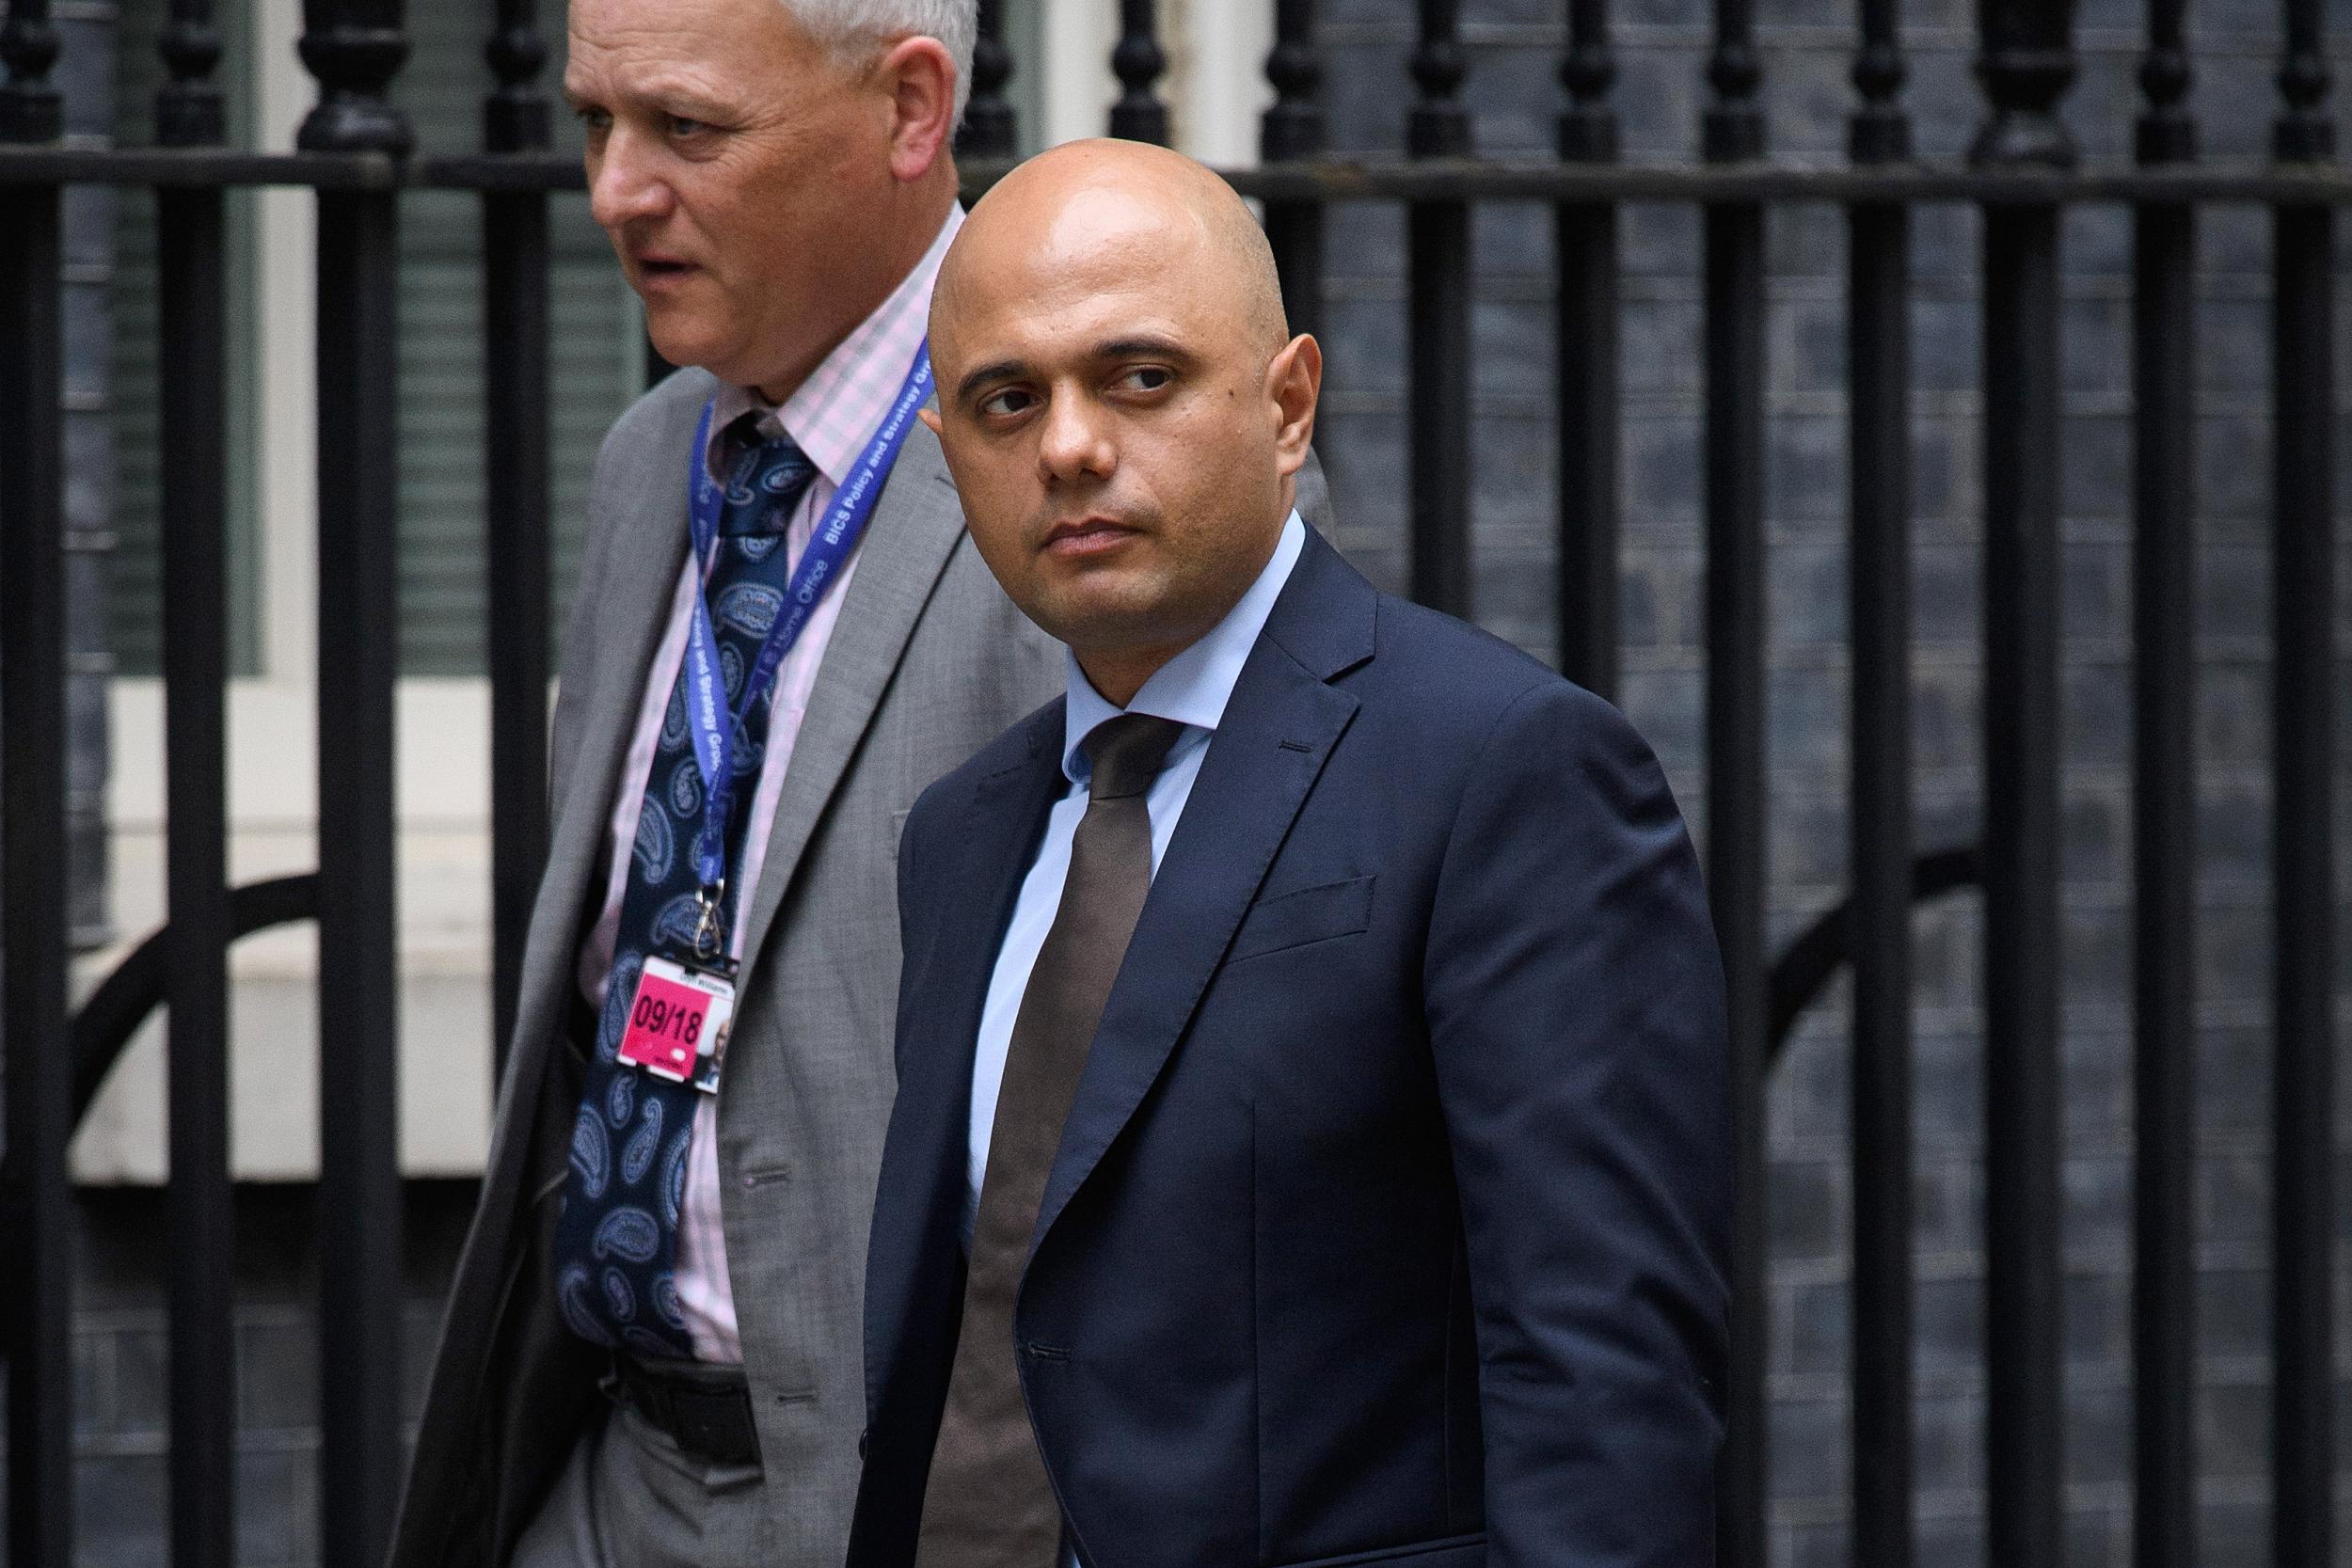 The home secretary is seeking to redress the shortfall in community policing and security service funding by coopting other public and private bodies into the fight against terror